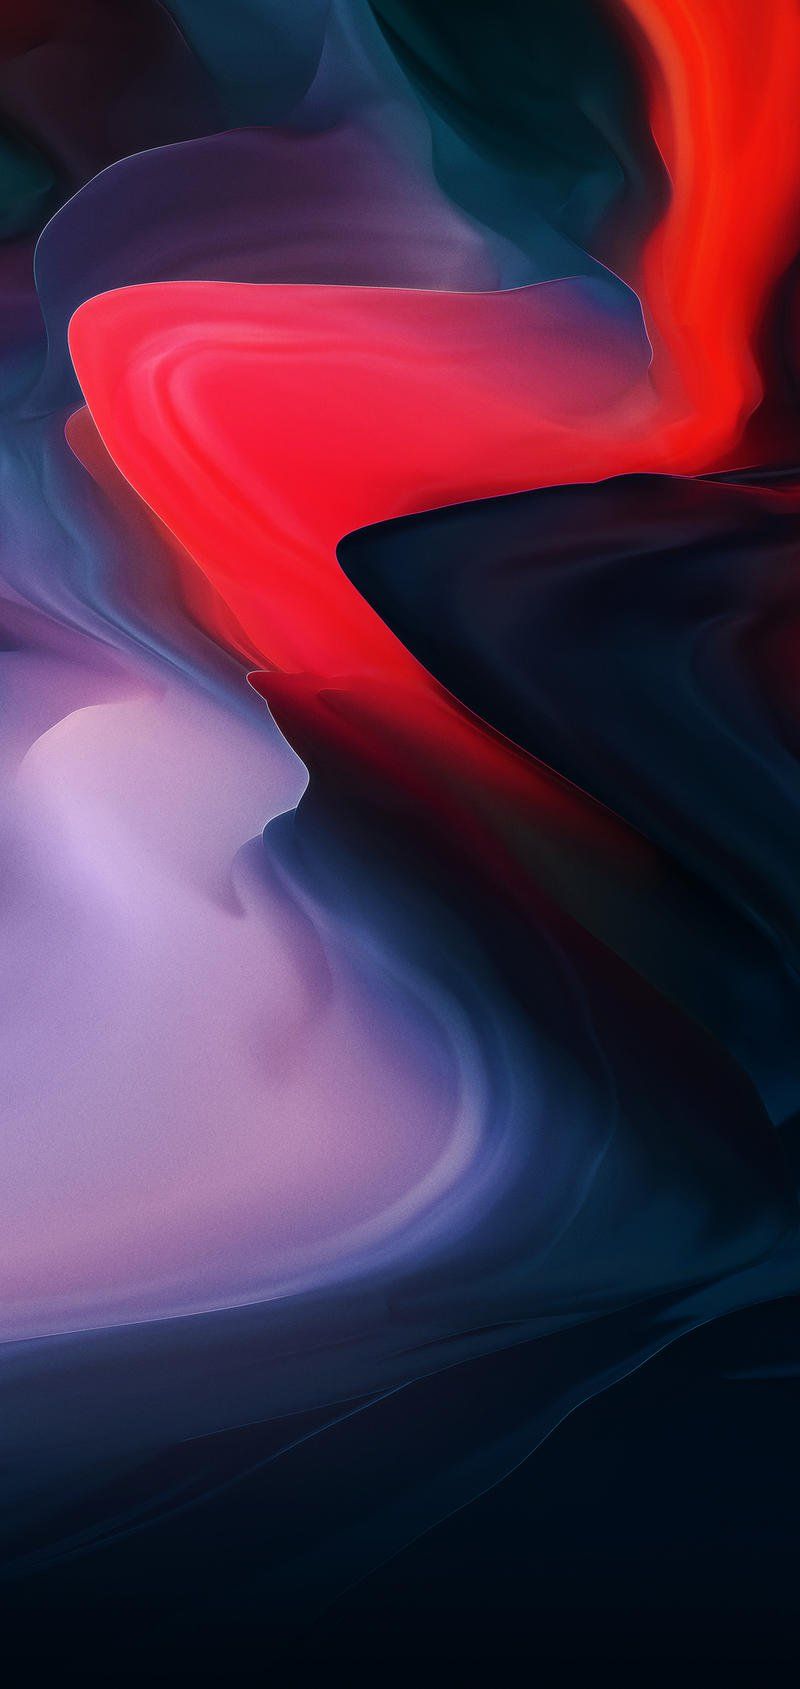 Snatch The Oneplus 6 Wallpaper In 4k Resolution Right 6